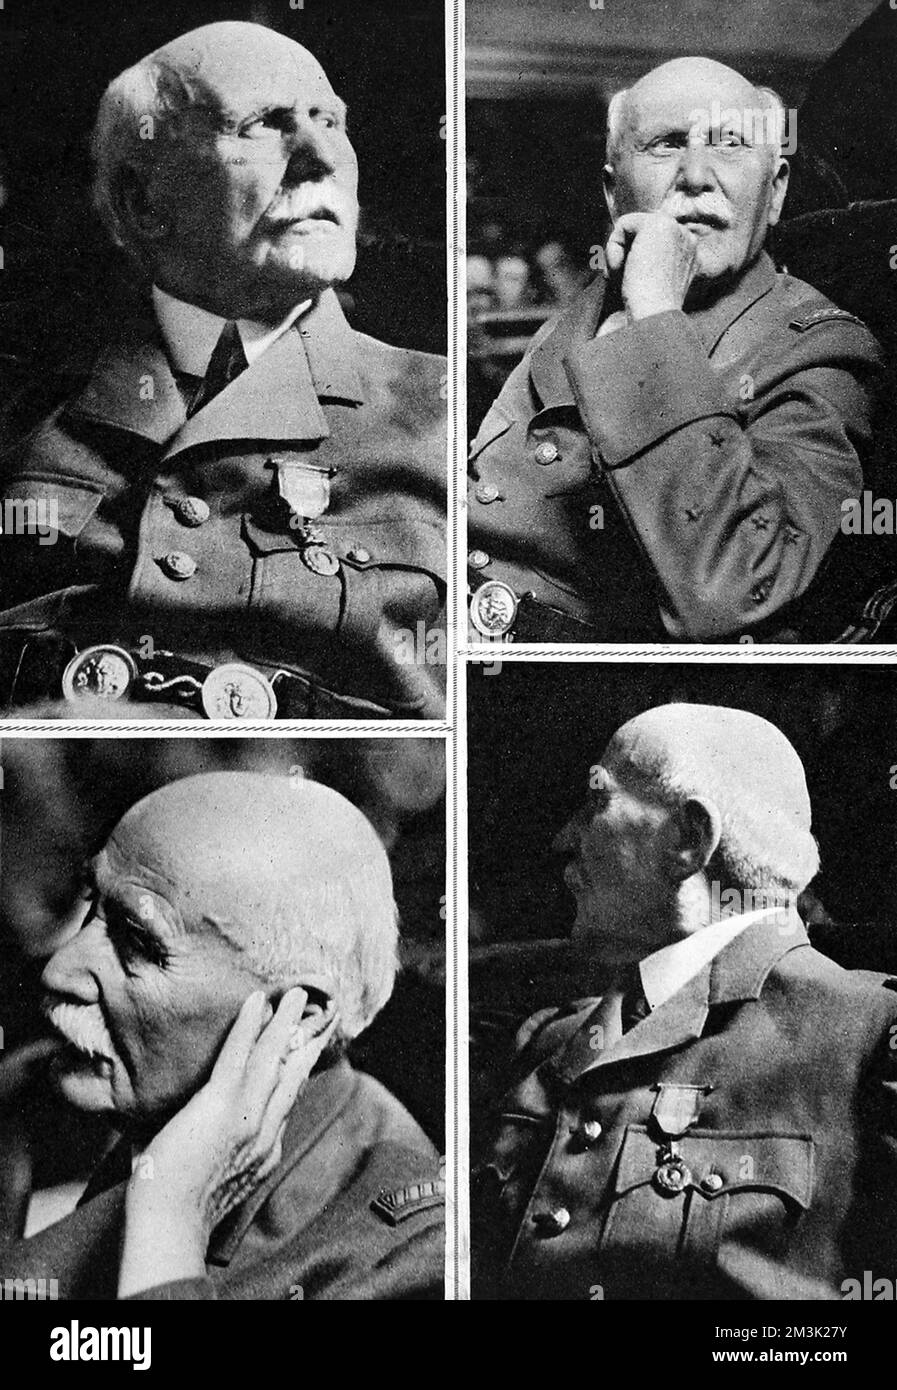 Series of photographs showing (Henri) Philippe (Omer) Petain (1856-1951), the French soldier and statesman, pictured whilst on trial for treason in July 1945.      Marshal Petain was a French national hero in World War I, but during the Second World War was the leader of the Vichy administration which led, with the Nazi defeat, to his trial for treason.  He was convicted and died in prison on the Ile d'Yeu.     Date: 1945 Stock Photo